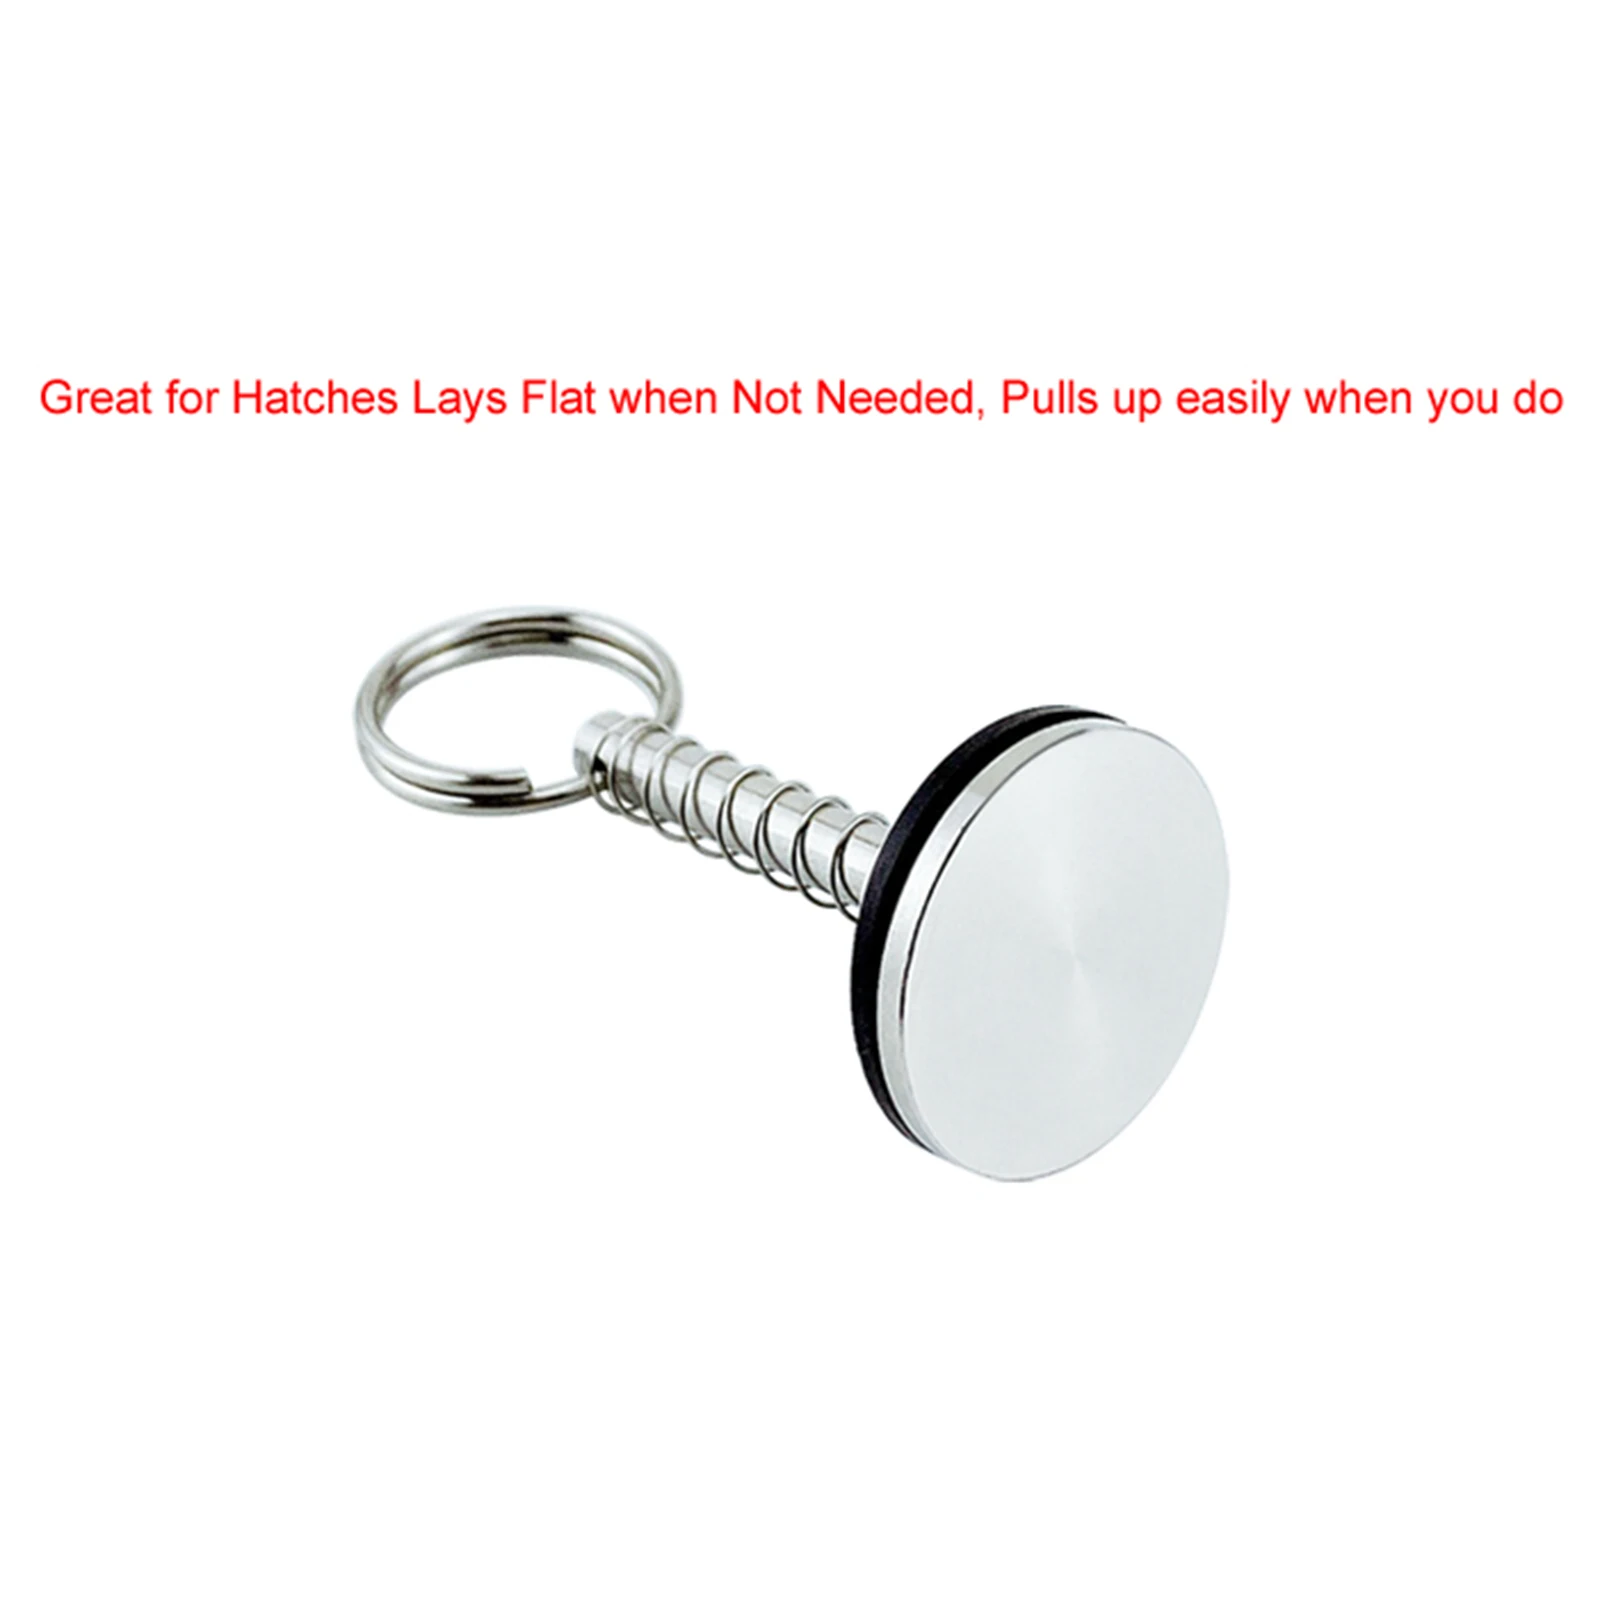 Hatch Cover Pull Handle Trap Door Latch for Boat Yacht Engine Cover Hardware